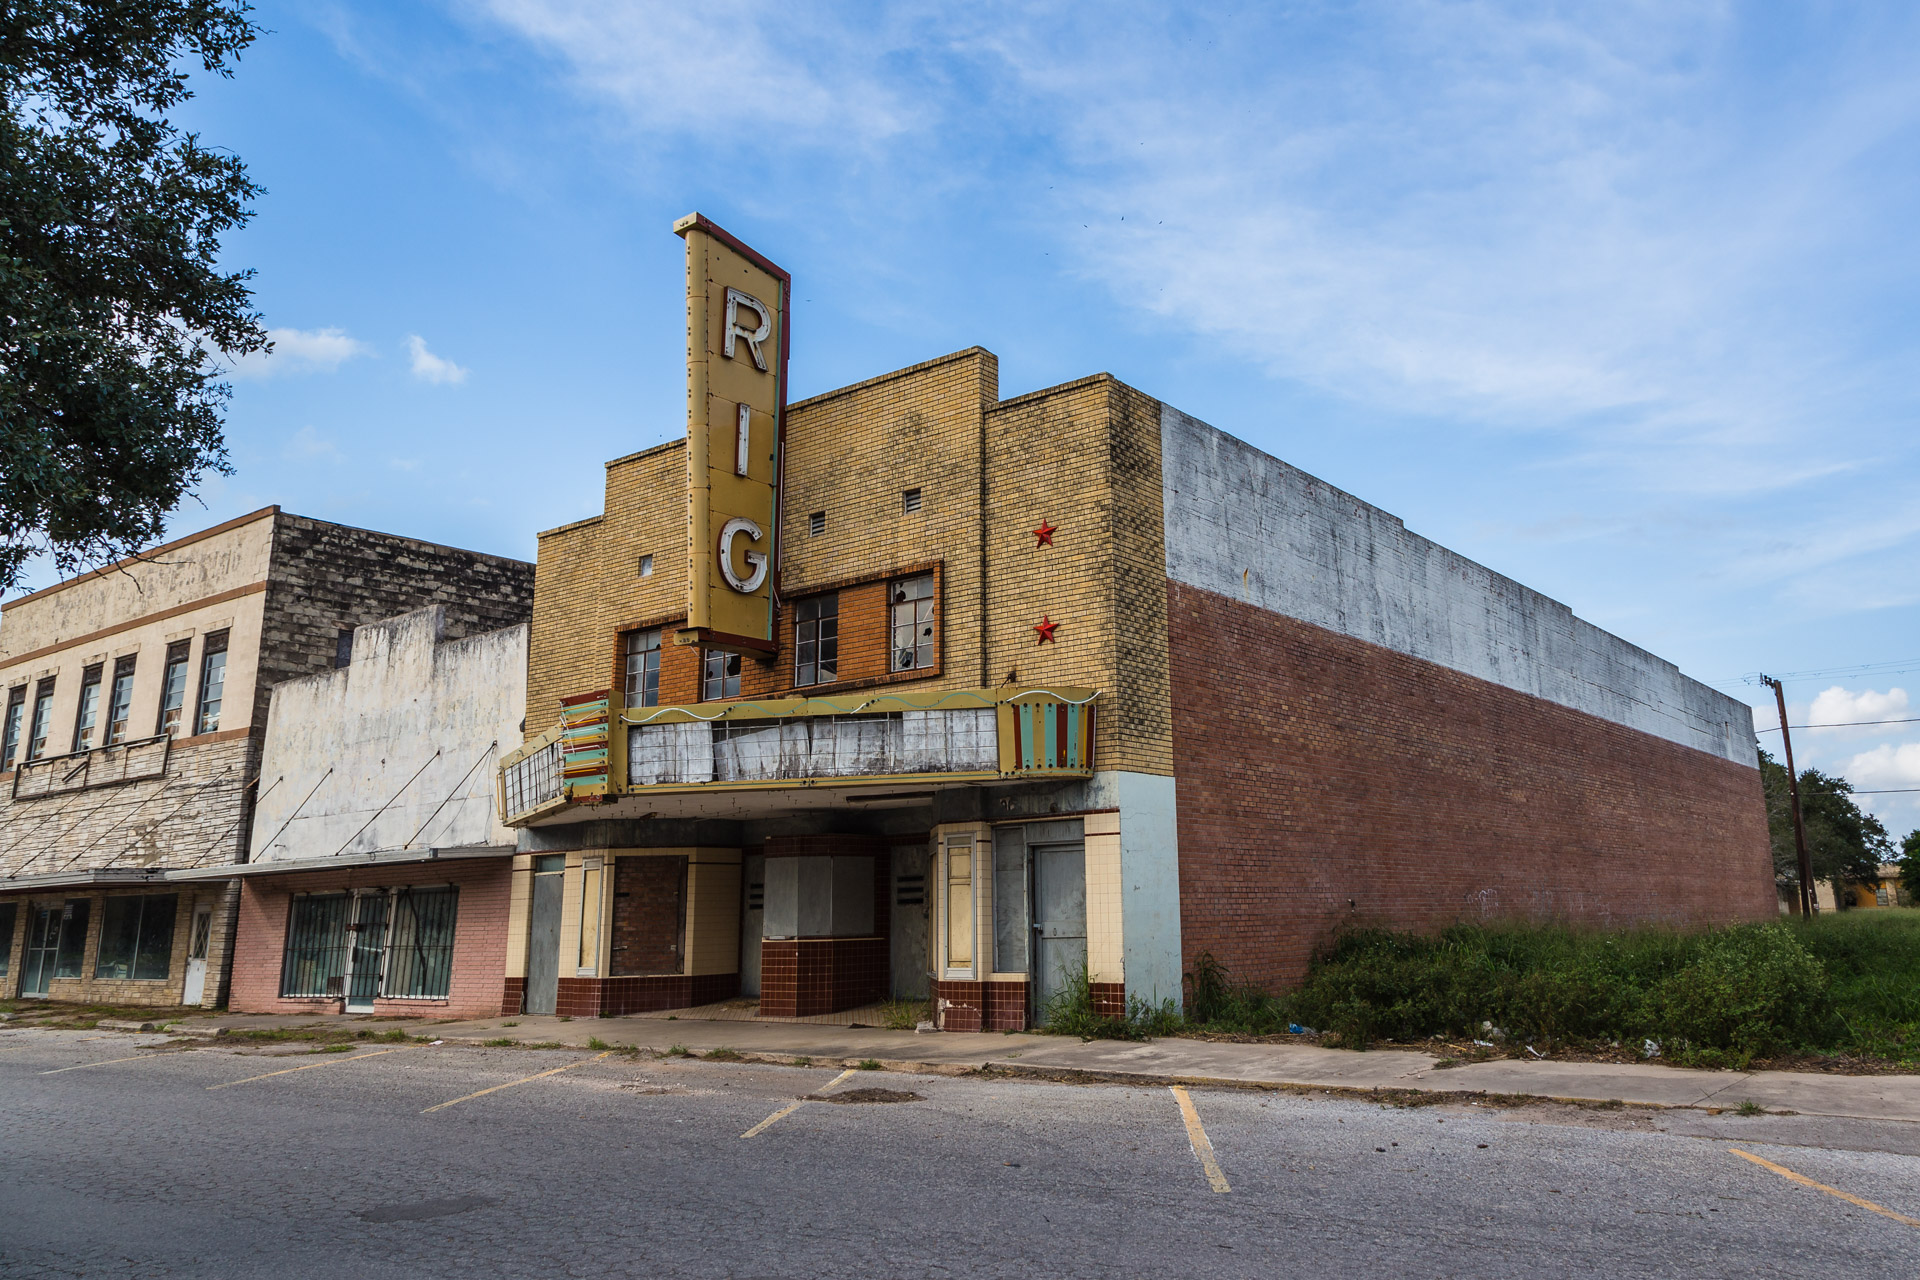 Premont, Texas - RIG Theater